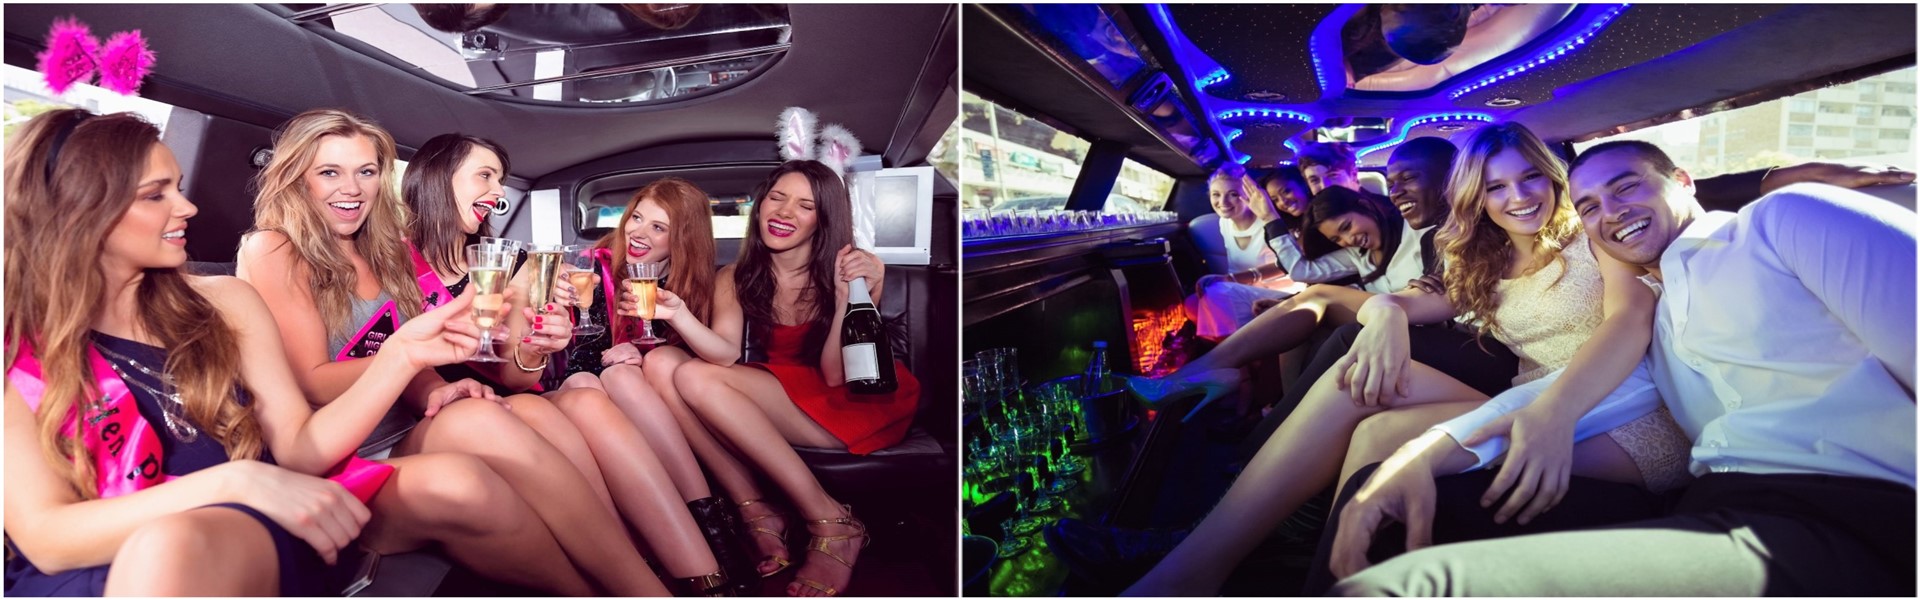 Do you want to spend a crazy night or a cool week end to celebrate your bachelor or bachelorette party in Sorrento Peninsula, Amalfi Coast or Naples? Ask us about the stripper service and if you do not have a location yet we can help you in that too; all you have to do is choose between trendy clubs, private villas or a beautiful Hummer limousine. We offer also many fun activities where you and your friends can take part to make the last days of singles memorable! www.enchantingsorrento.com